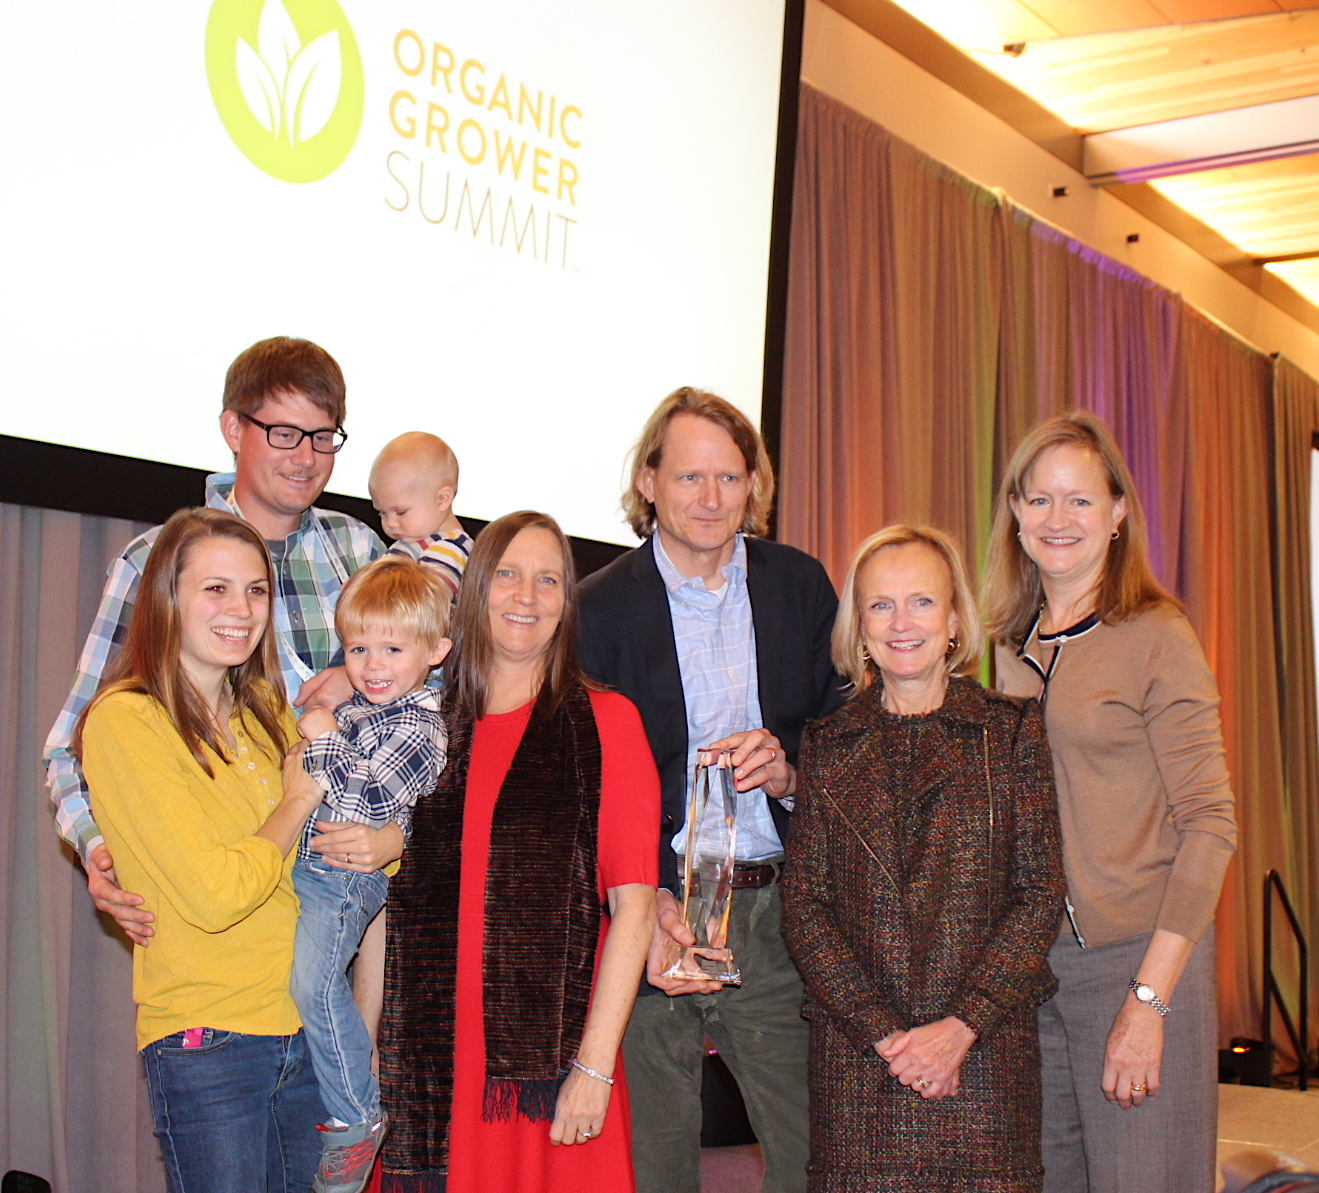 Members of the Lundberg family gathered for a photo after the award presentation.